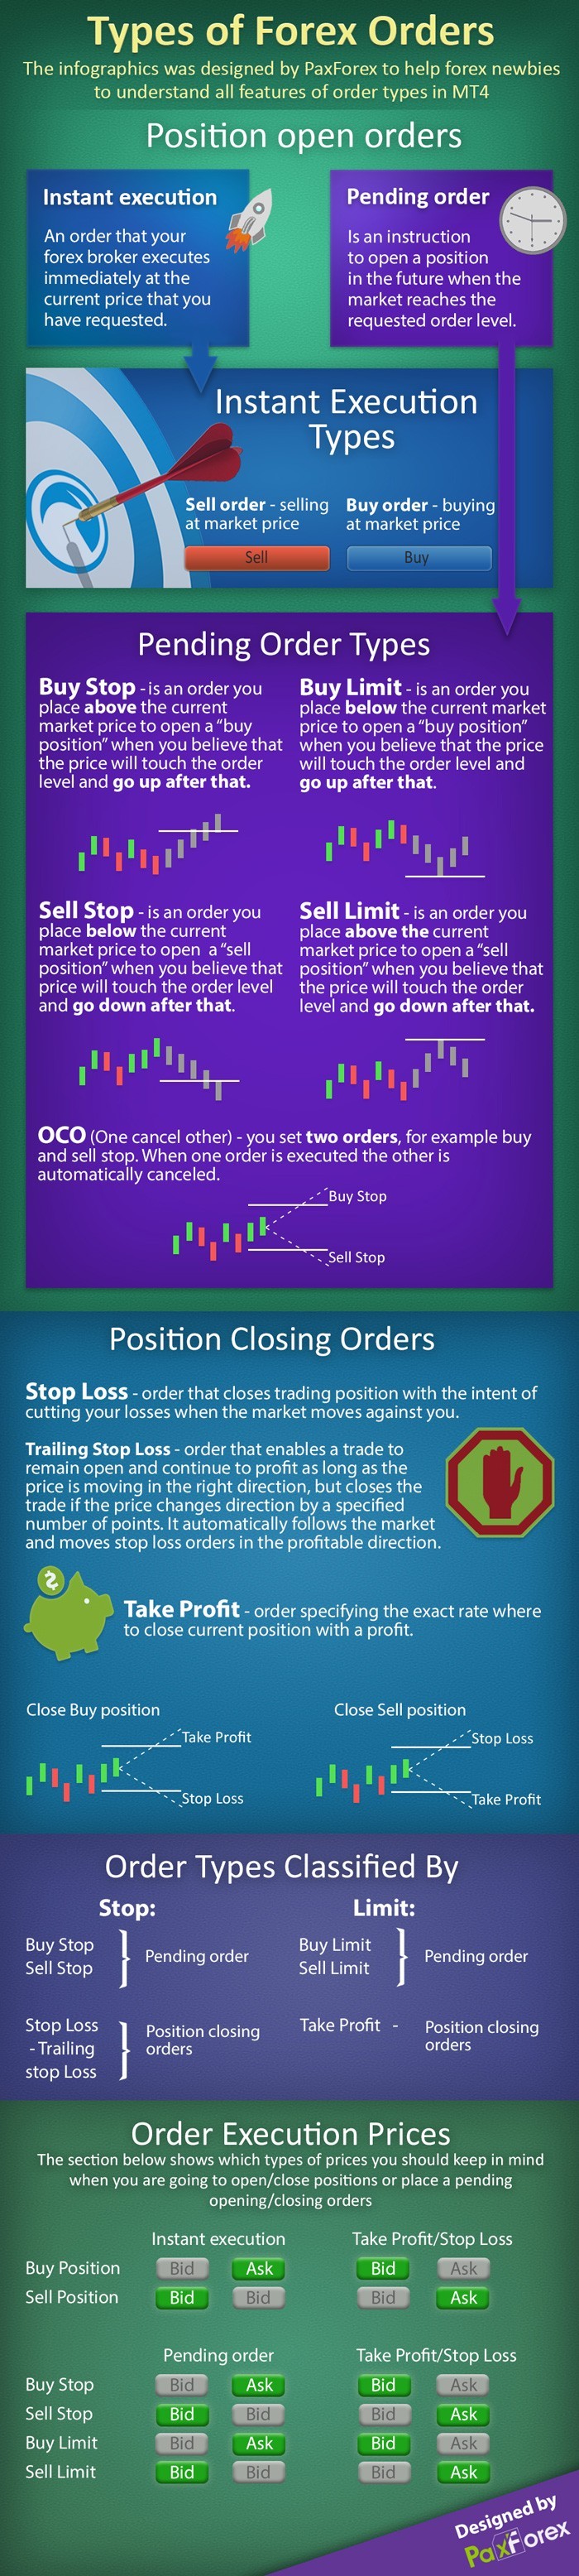 Types of Forex Orders1